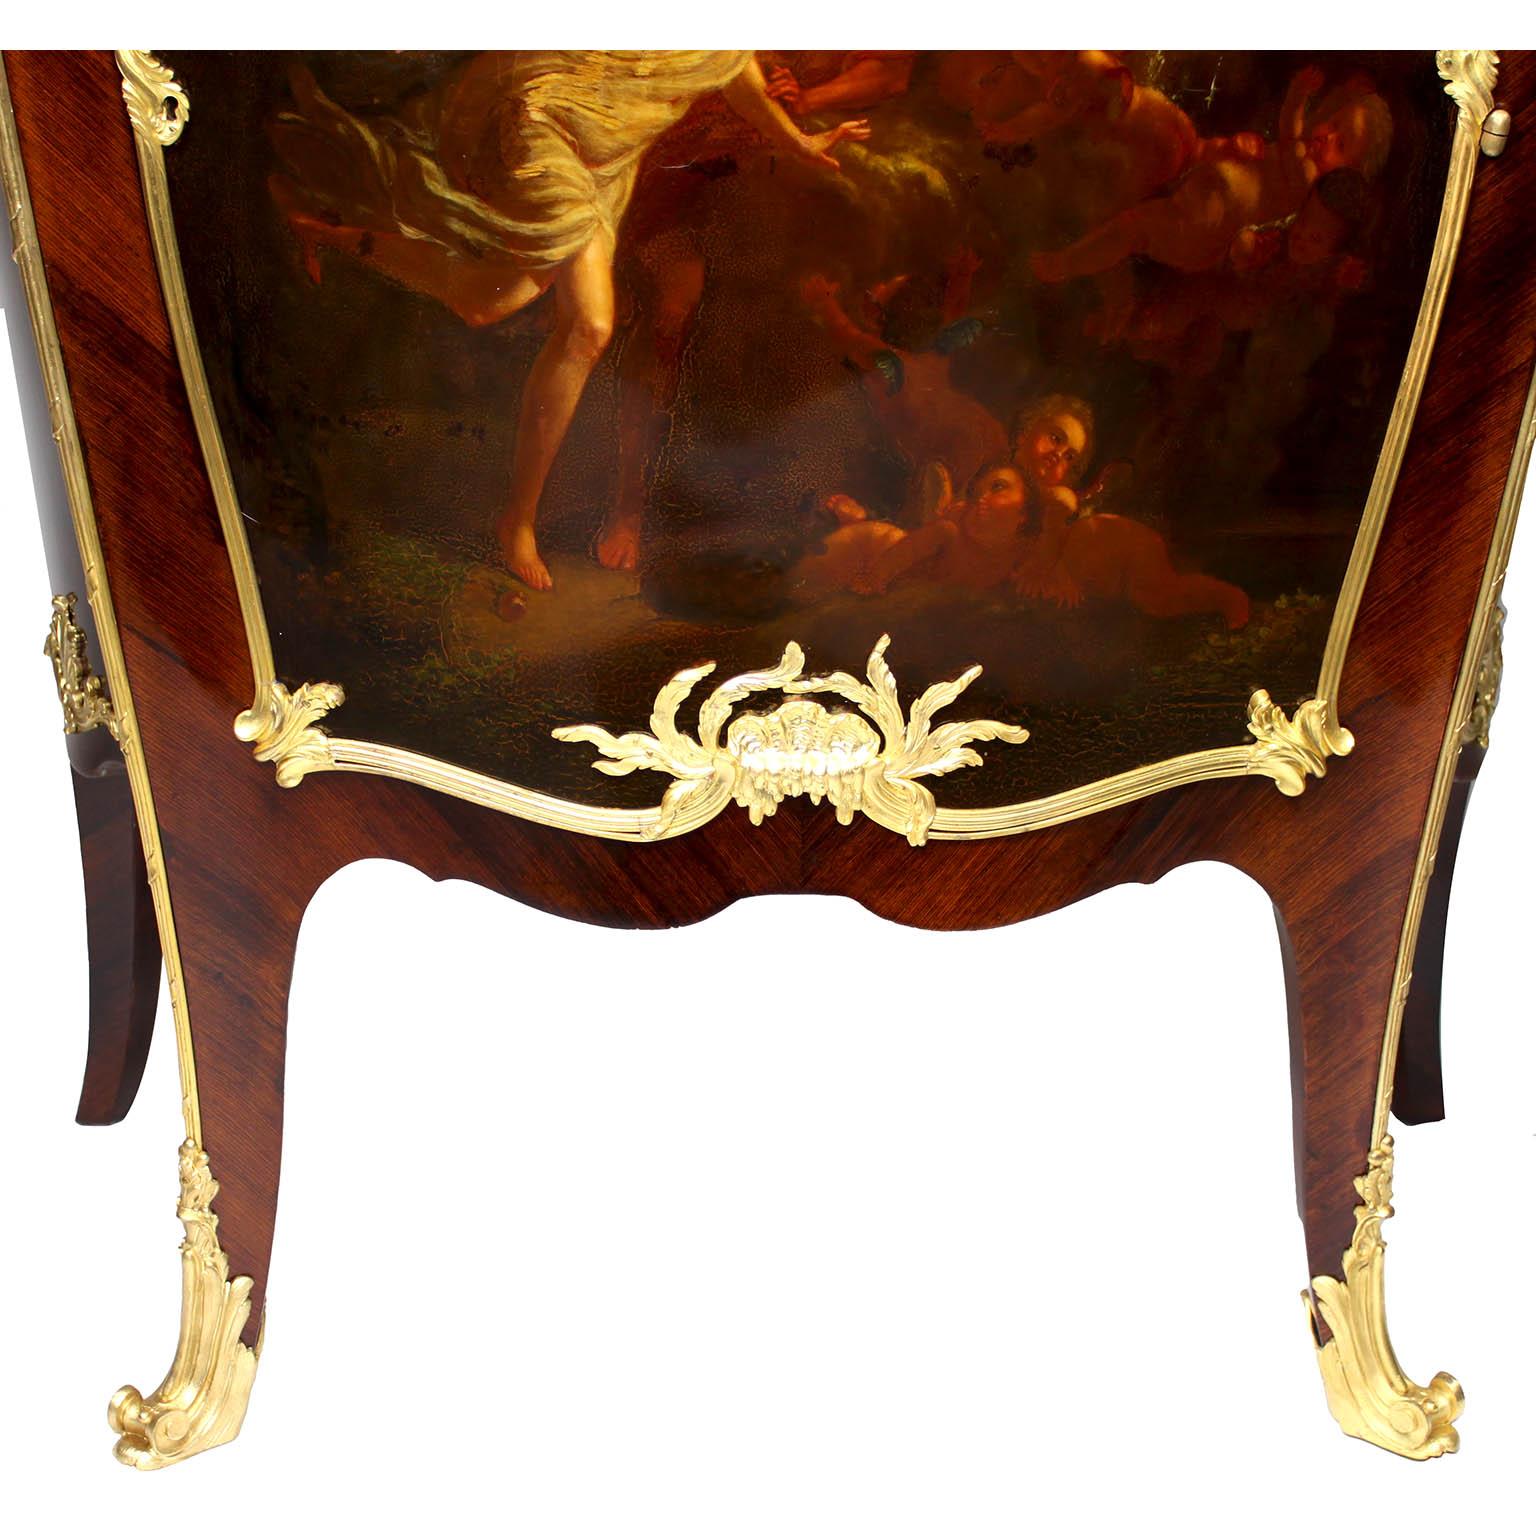 Bronze French 19th C. Louis XV Style Ormolu-Mounted Vernis Martin Cabinet by F. Linke For Sale